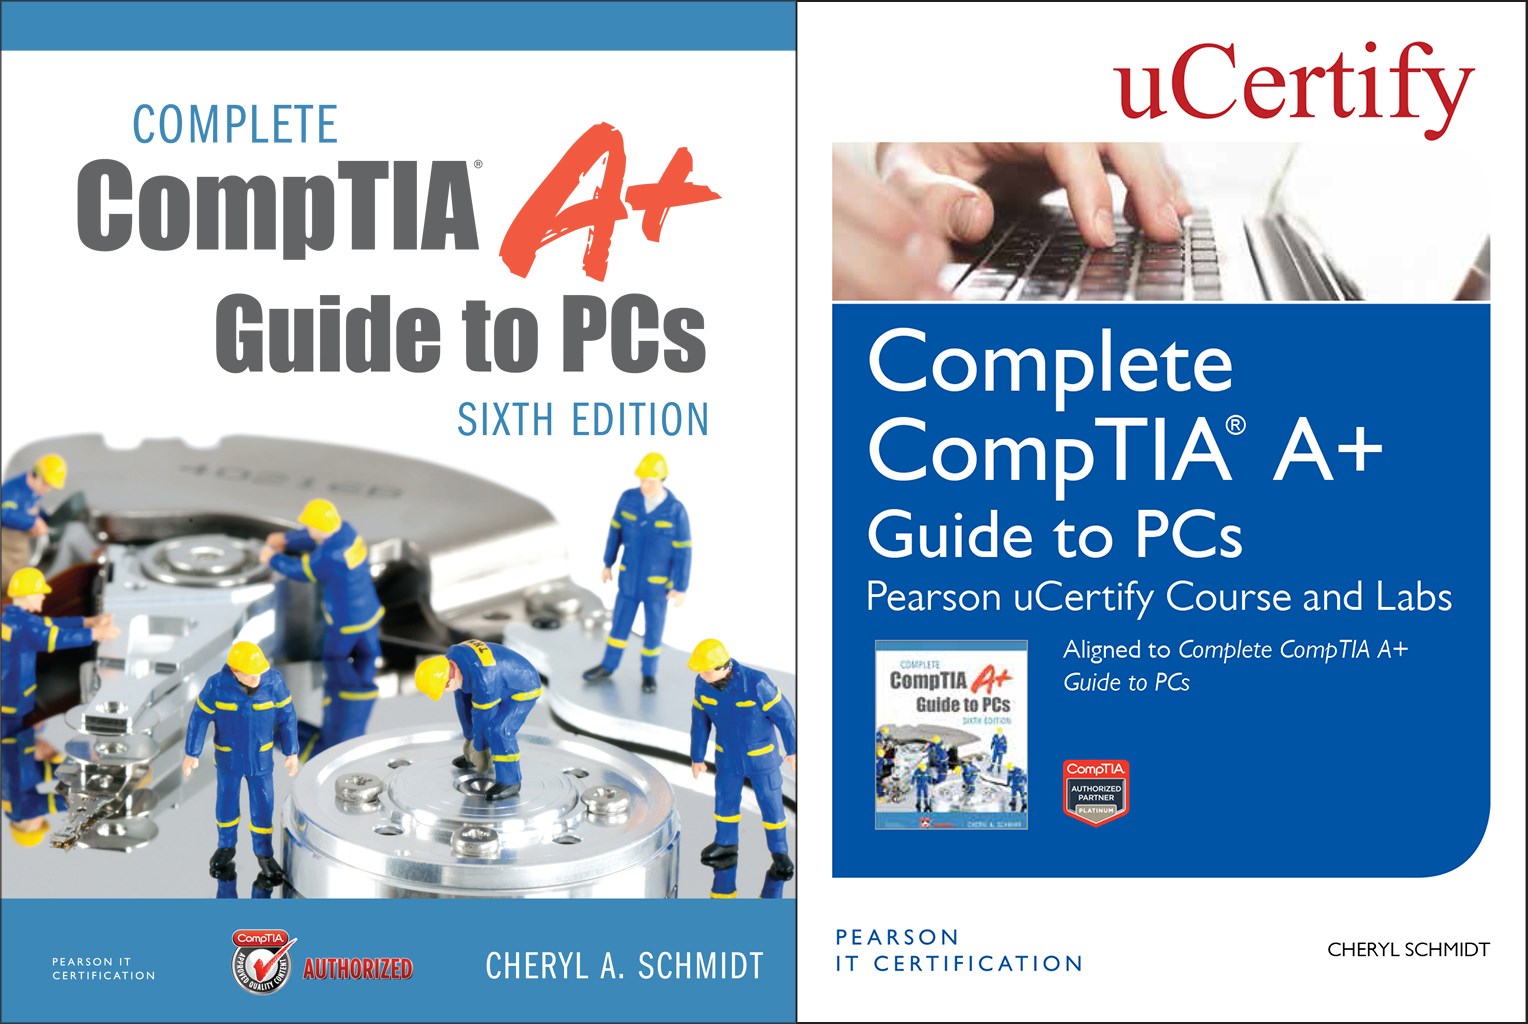 Complete CompTIA A+ Guide to PCs Pearson uCertify Course and Labs and Textbook Bundle